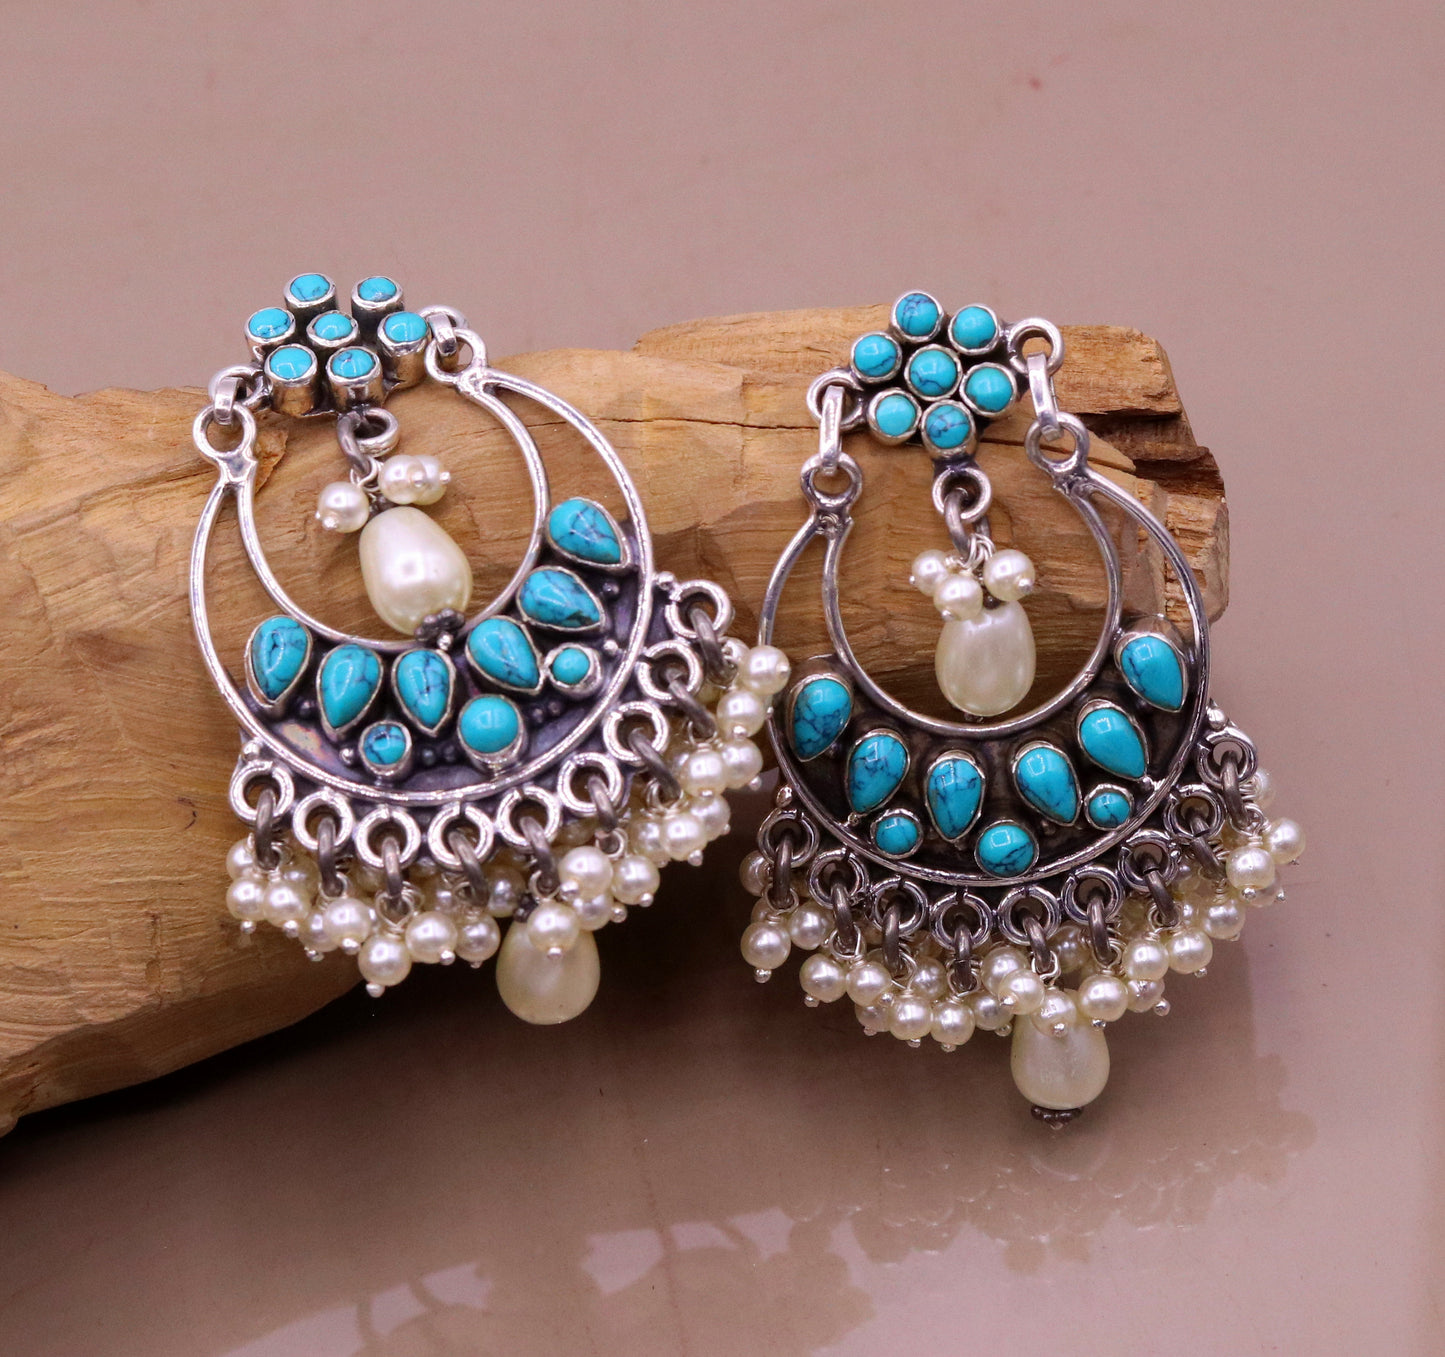 925 Sterling silver handmade fabulous pearl and turquoise stud earrings, best wedding brides collection charm earring dangler jewelry s710 - TRIBAL ORNAMENTS